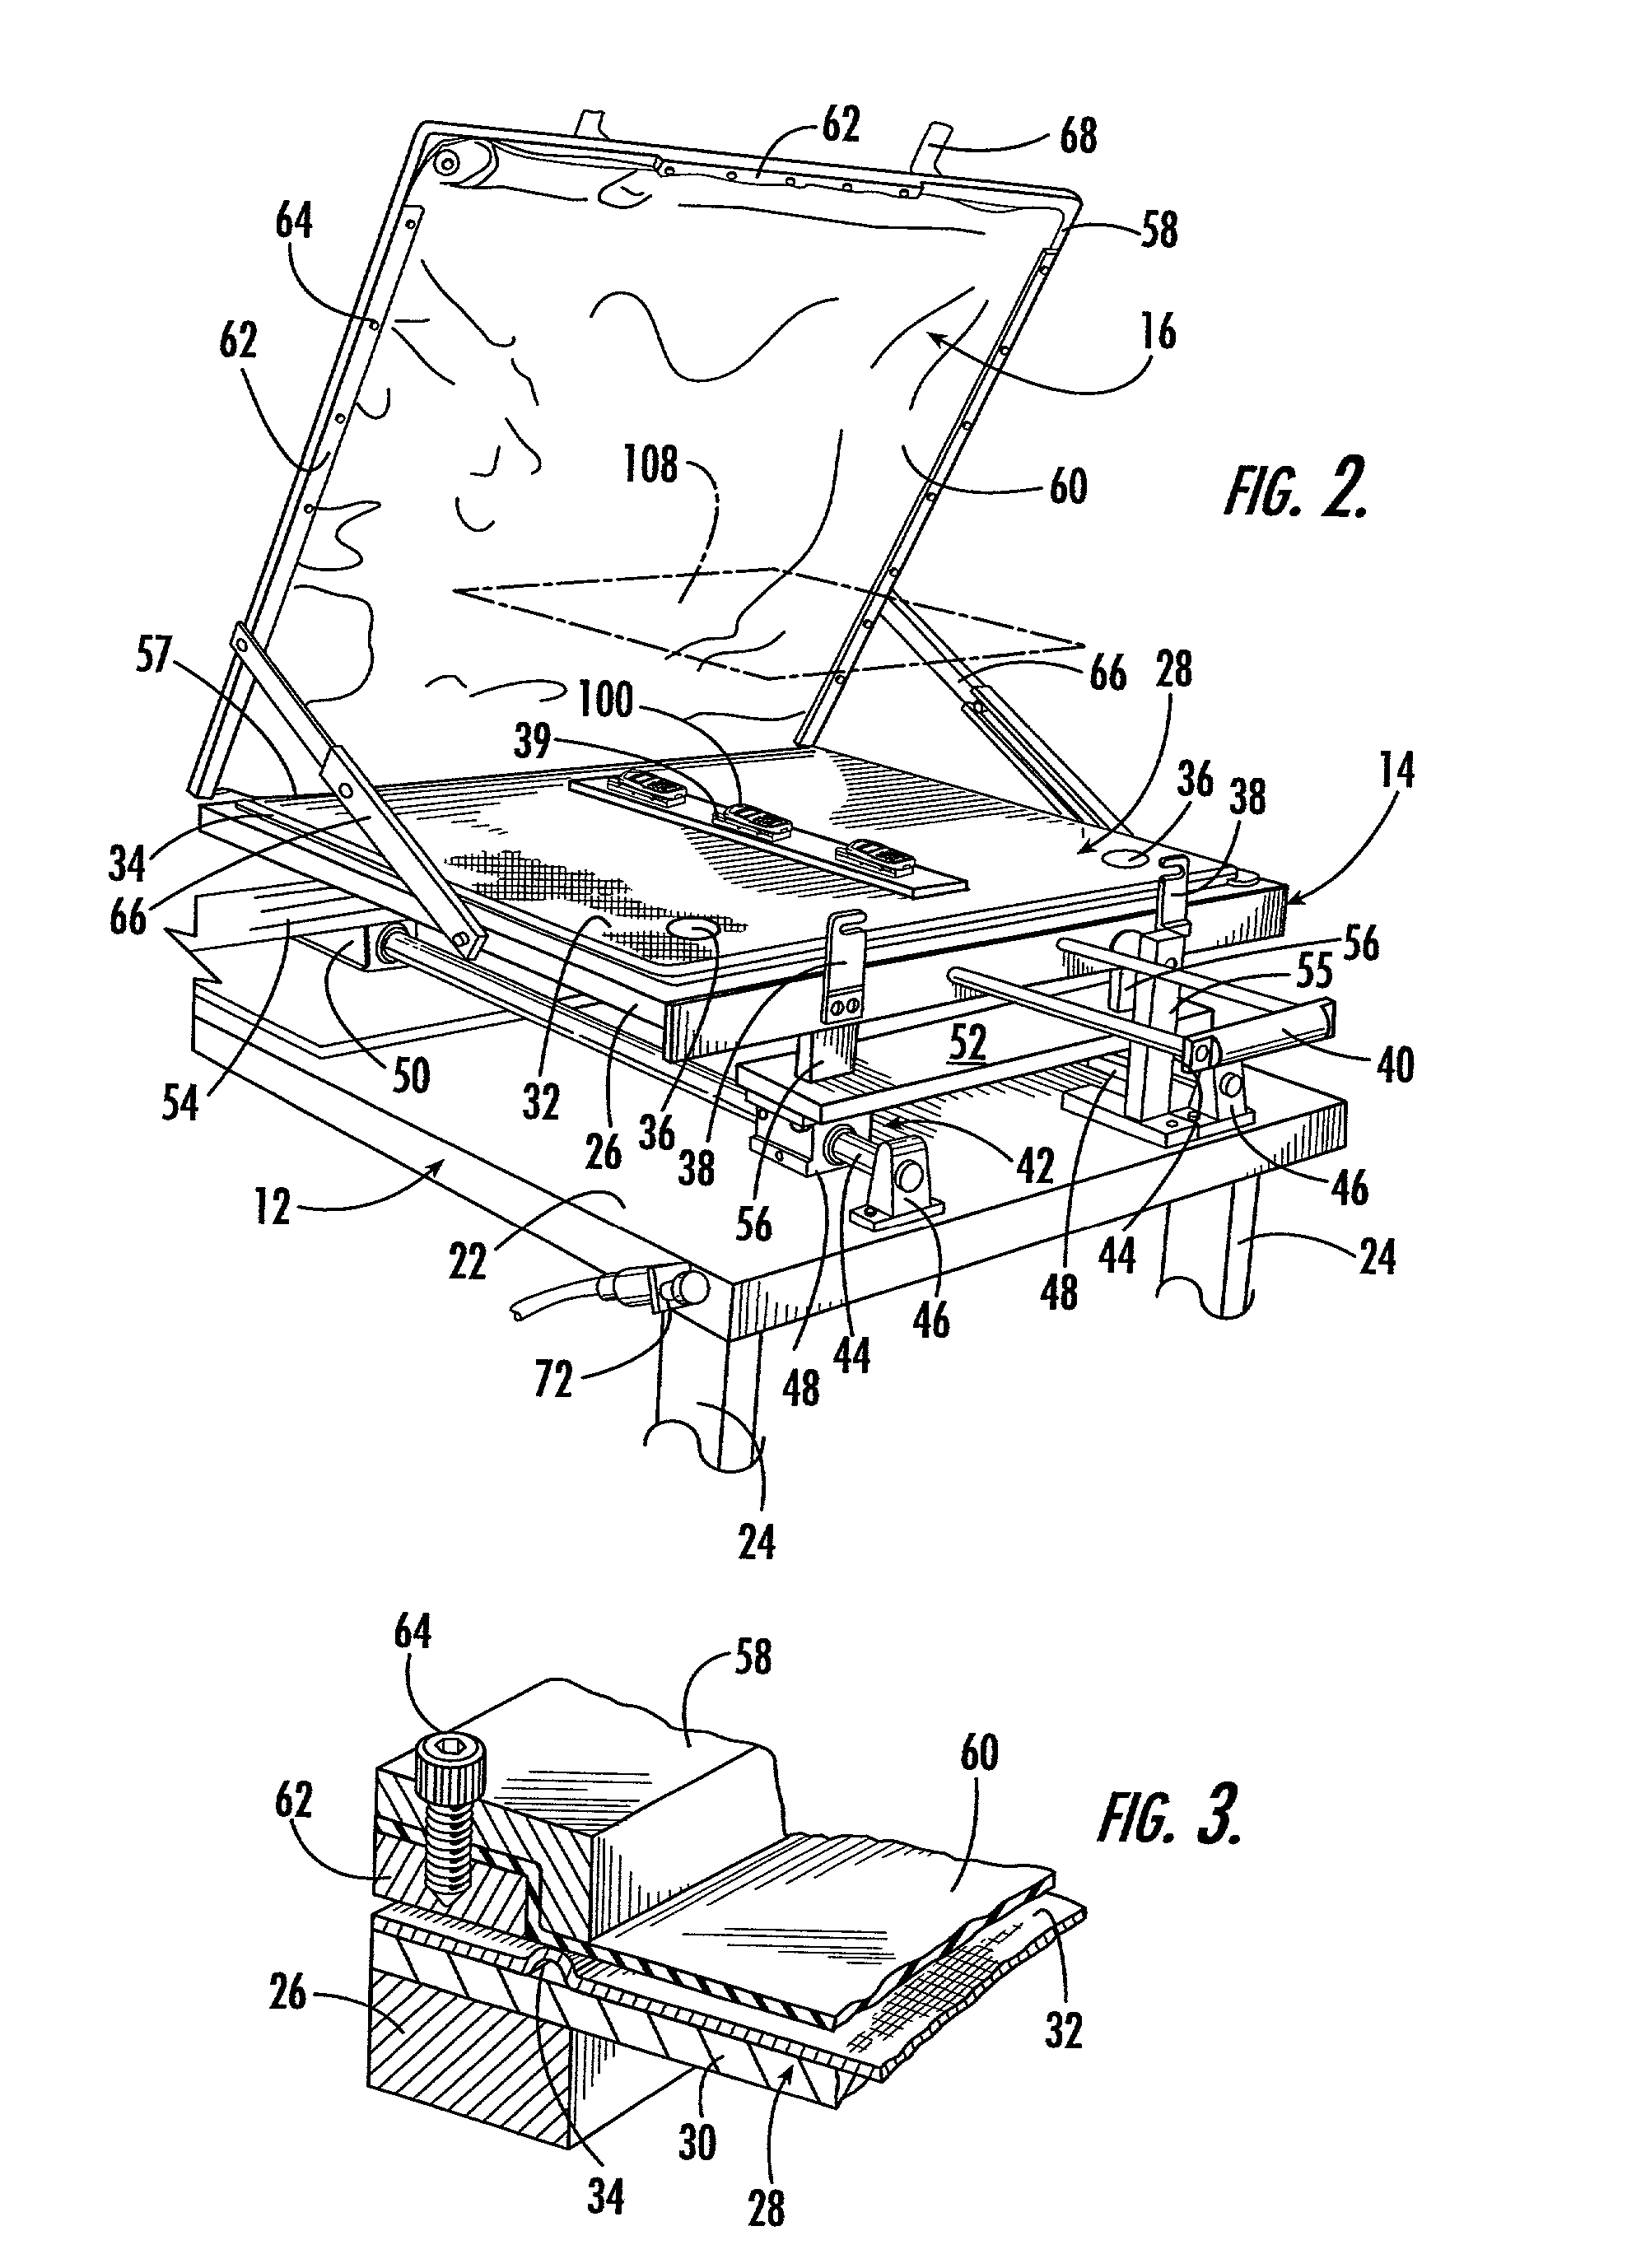 Apparatus with multi-directional radiation emitters for printing a dye image onto a three dimensional object